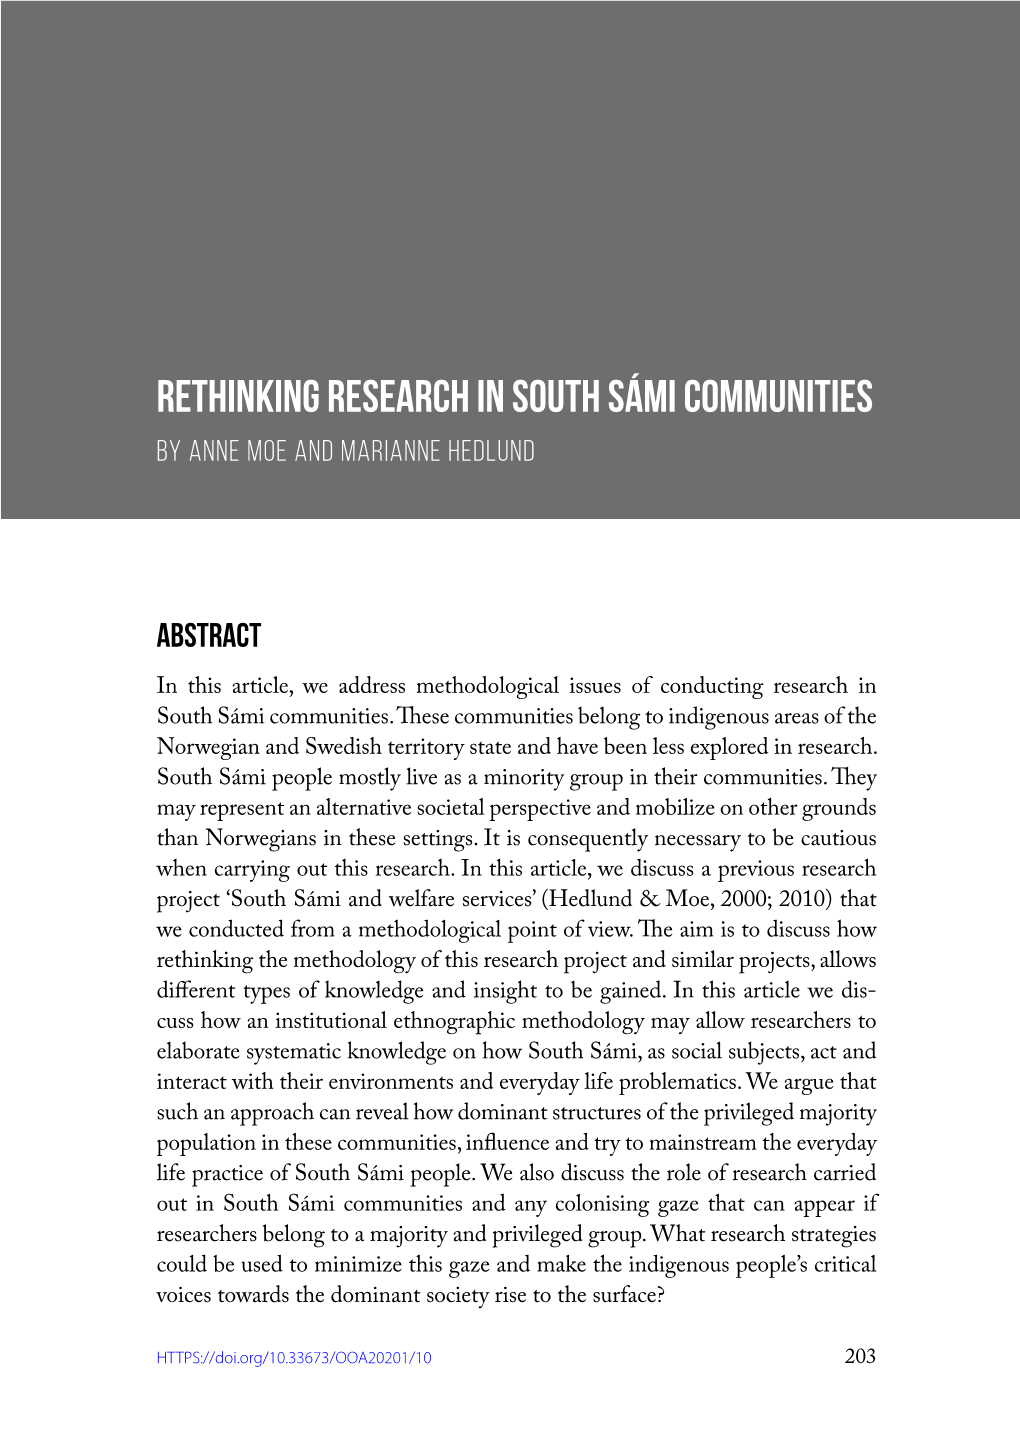 RETHINKING RESEARCH in SOUTH SÁMI COMMUNITIES by Anne Moe and Marianne Hedlund